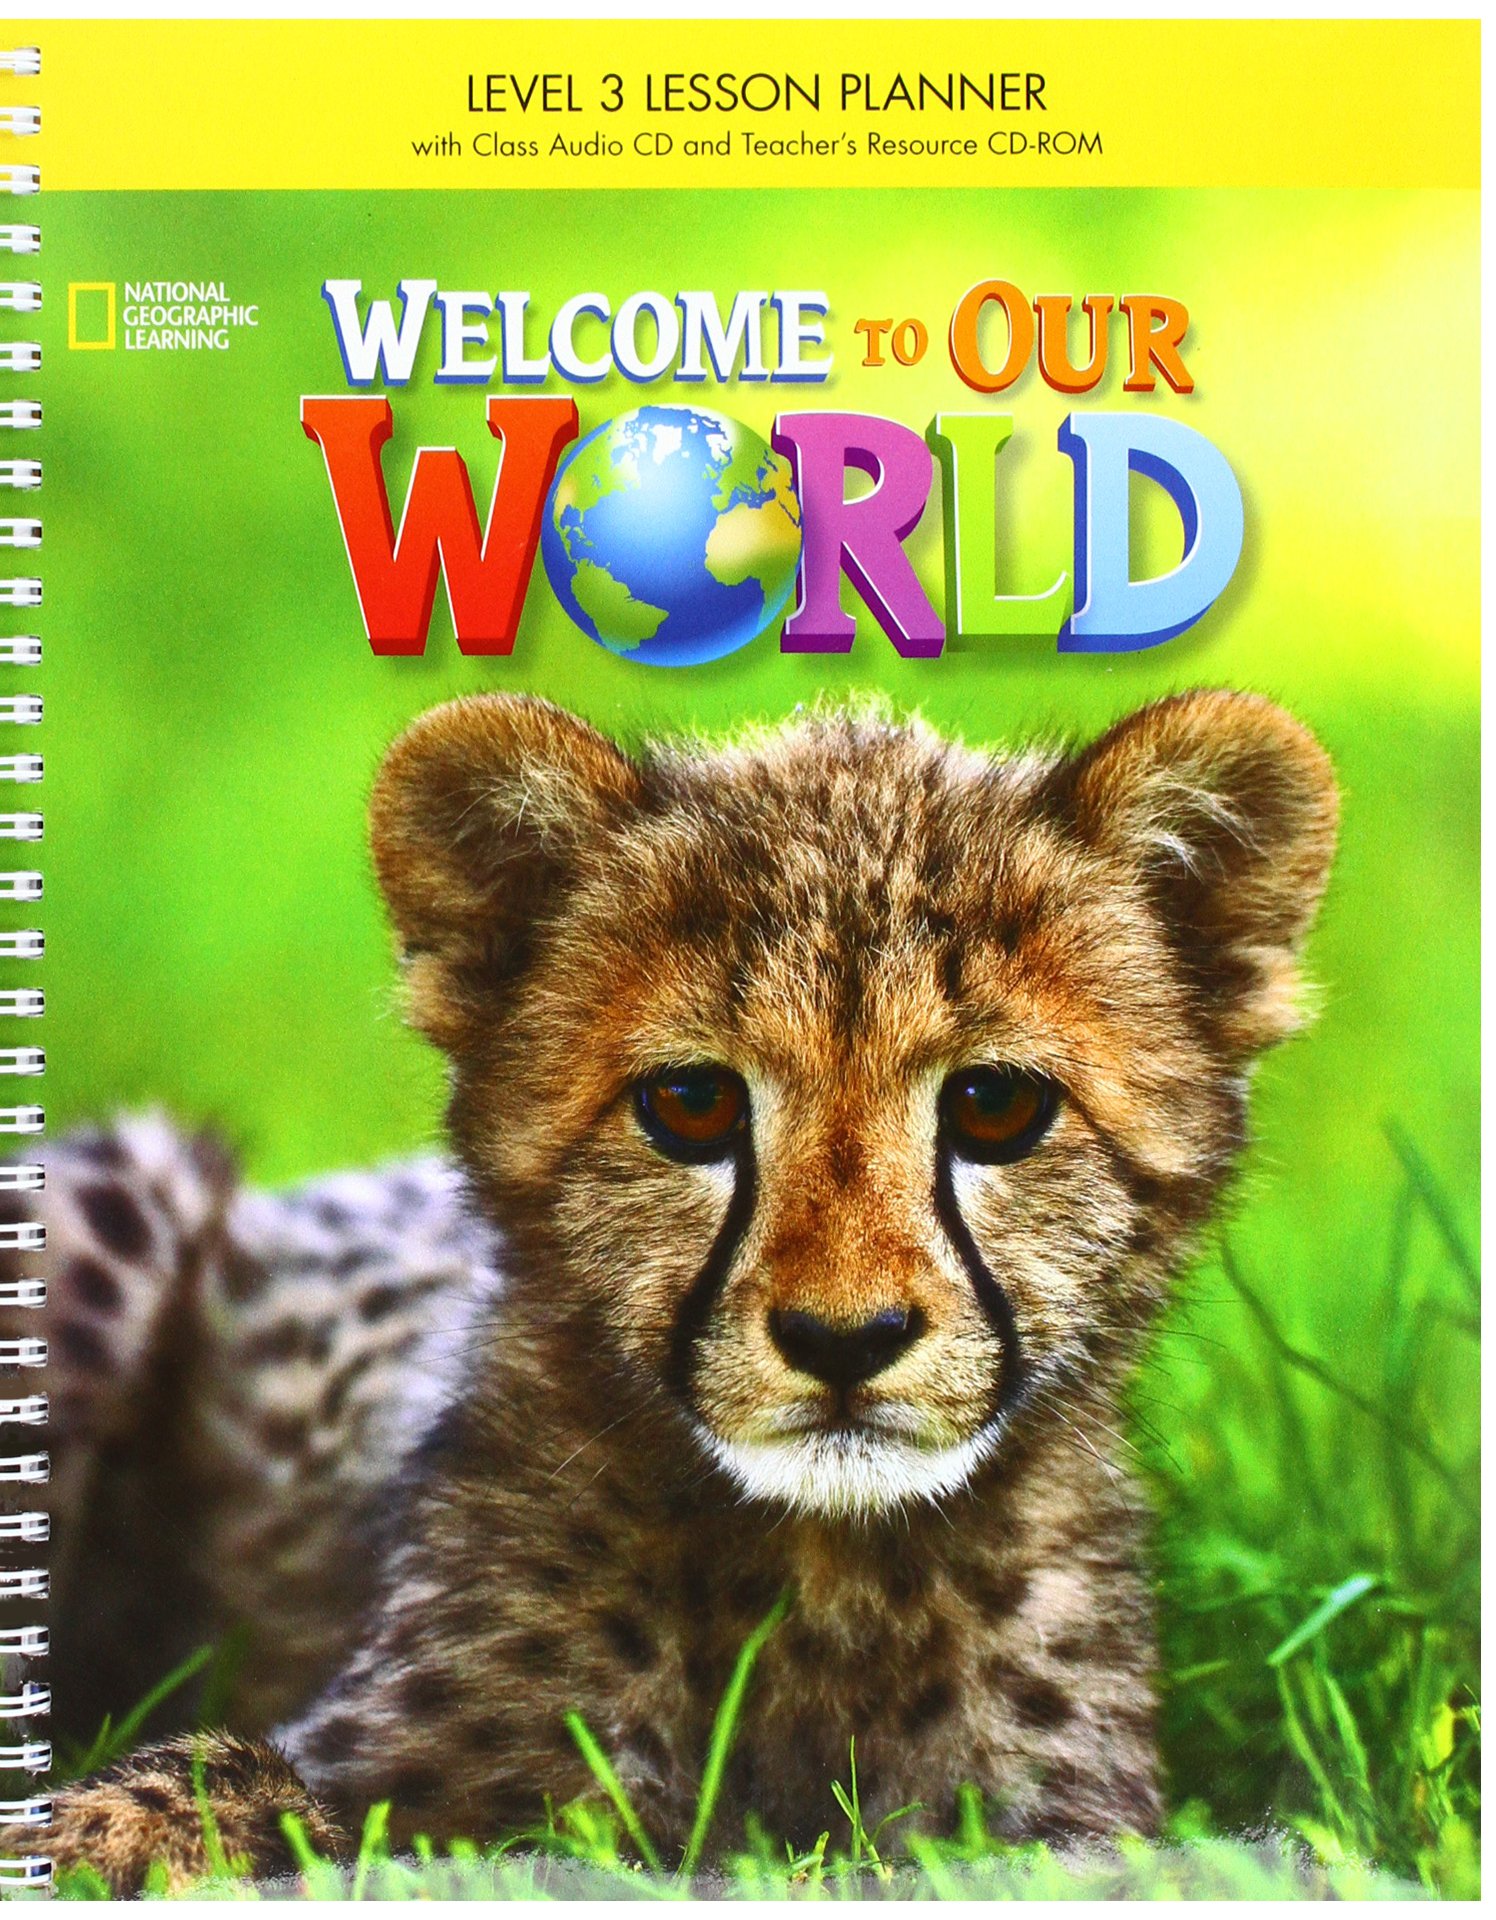 WELCOME TO OUR WORLD 3 Lesson Planner with MyNGconnect online + Class Audio CD + Teacher's Resource CD-ROM